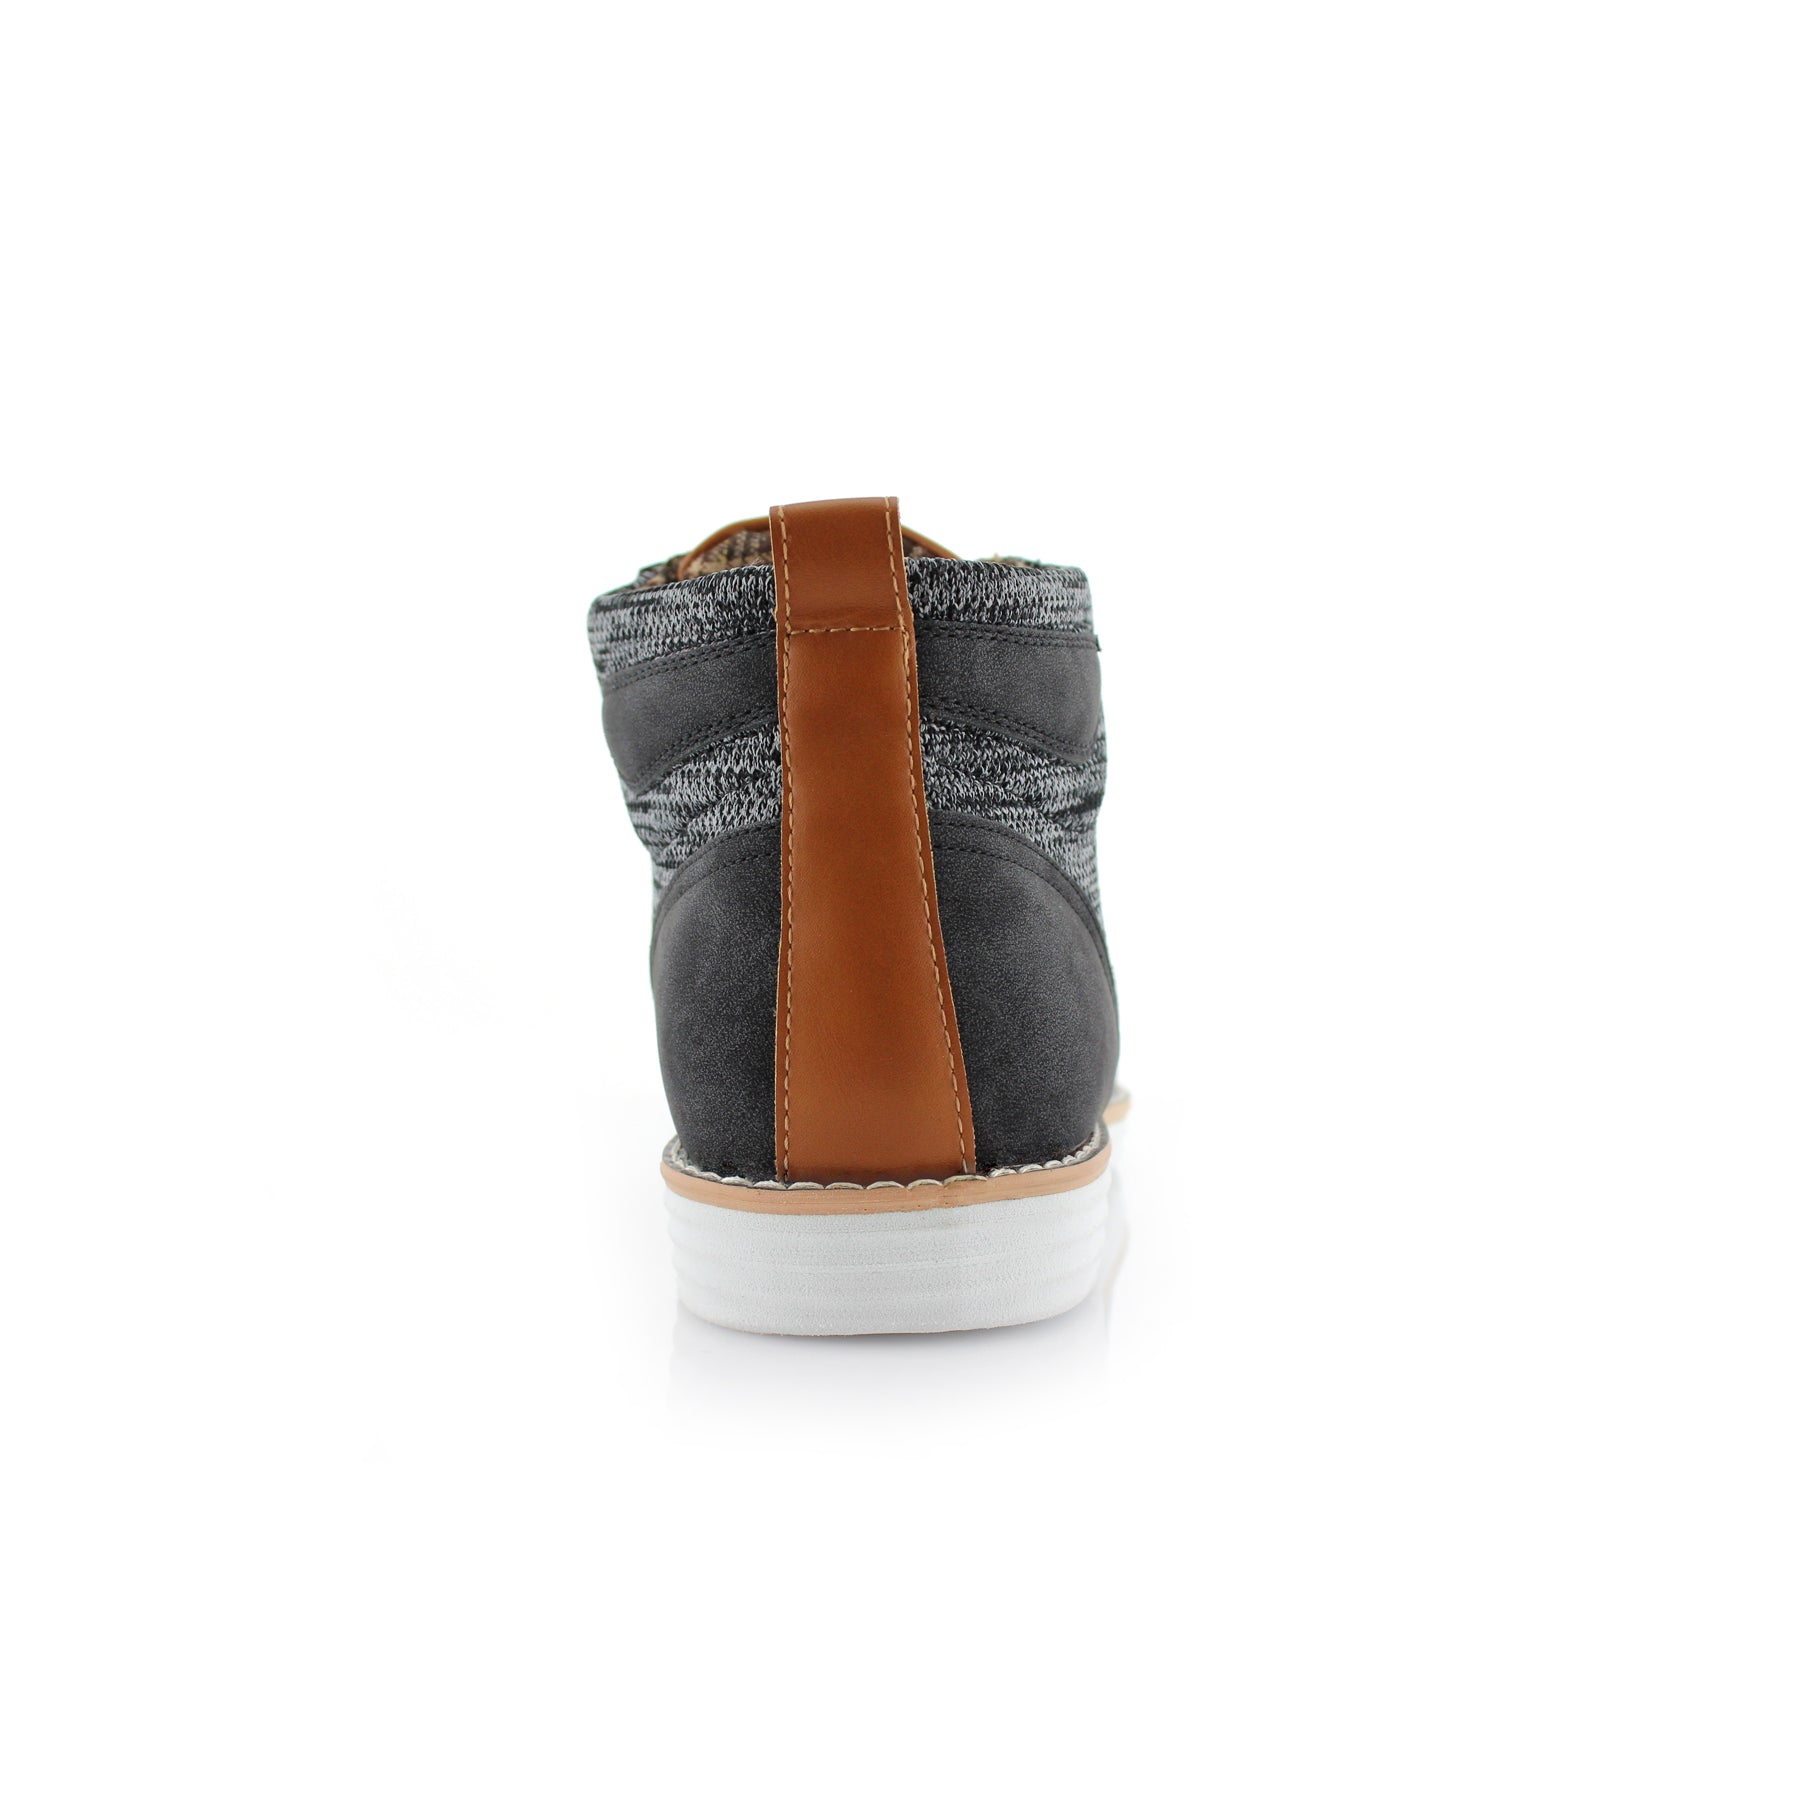 Duo-textured Sneaker Chukka Boots | Bohort by Polar Fox | Conal Footwear | Back Angle View